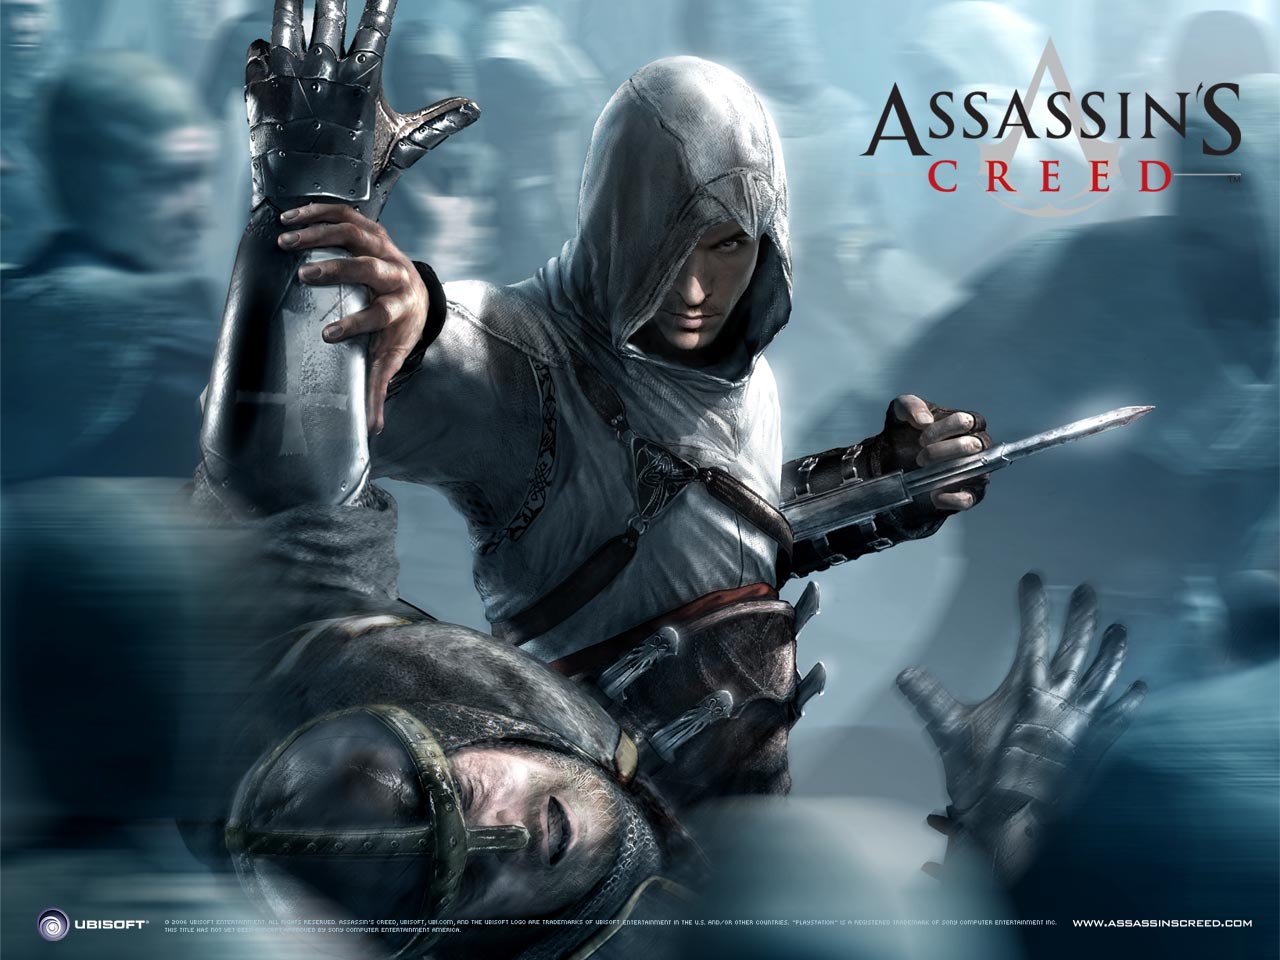 Assassins Creed 1 Ripped PC Game Free Download 3.1GB